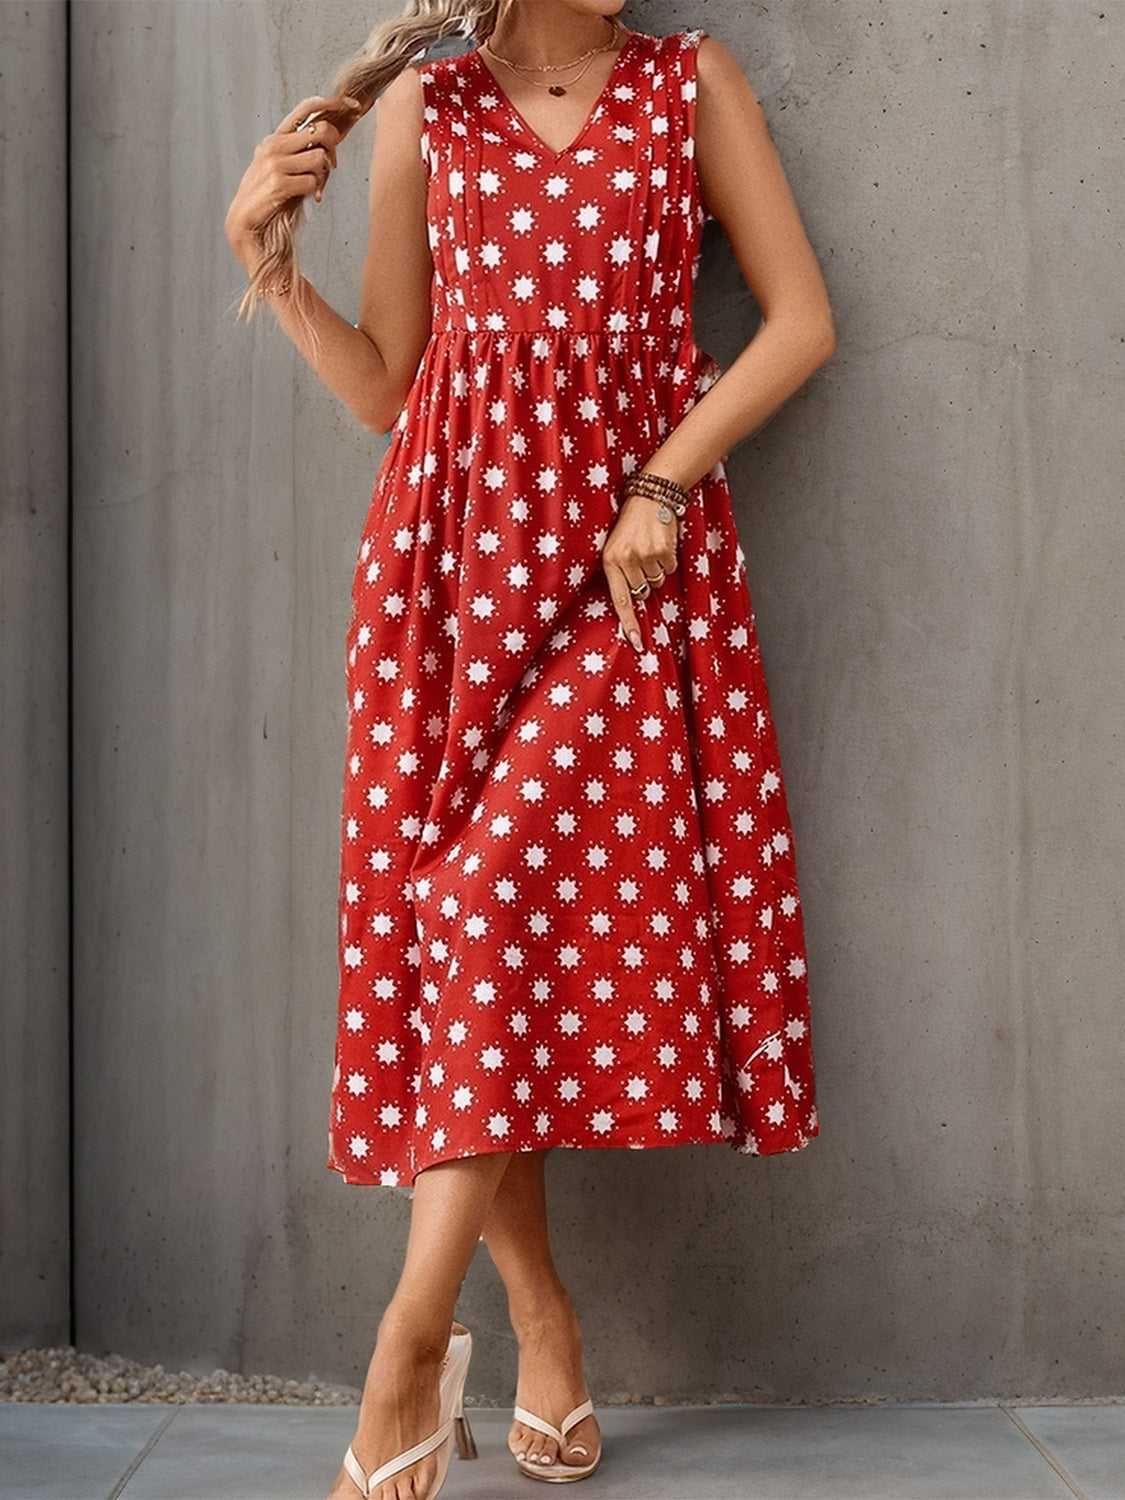 Red midi dress with a floral pattern and breathable fabric.